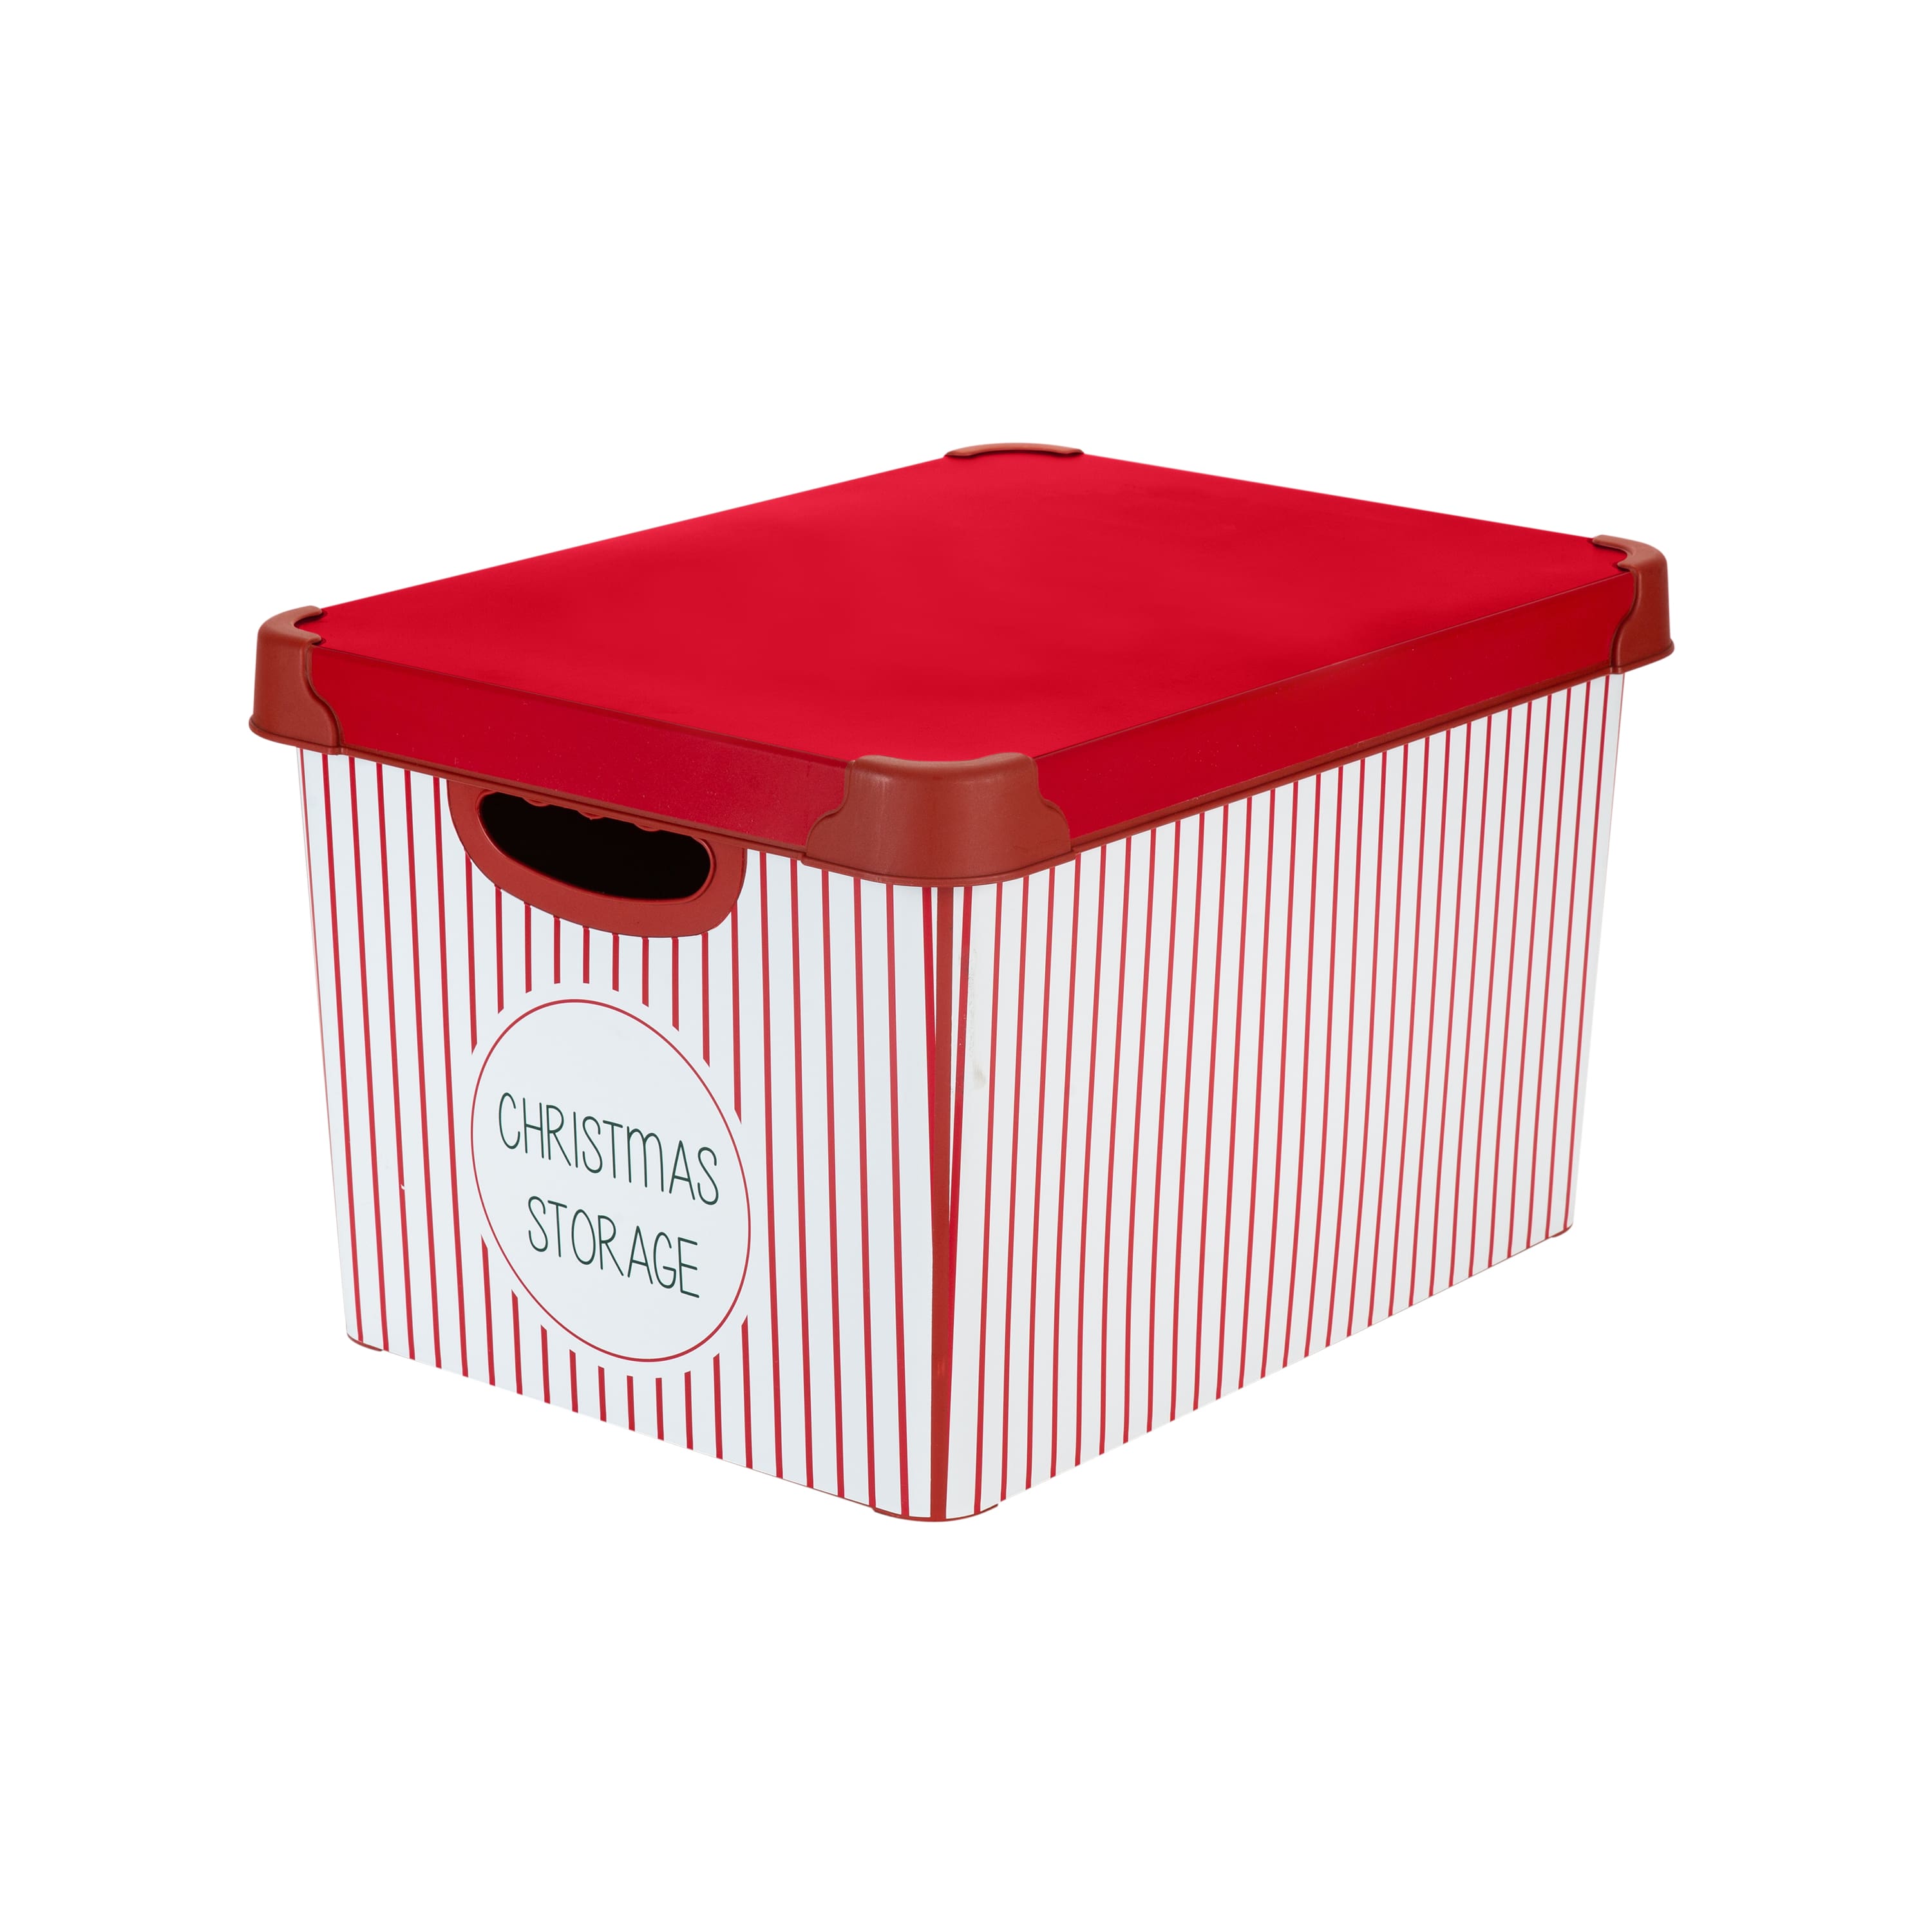 HOLDN' STORAGE Christmas Ornament Storage Container Box with